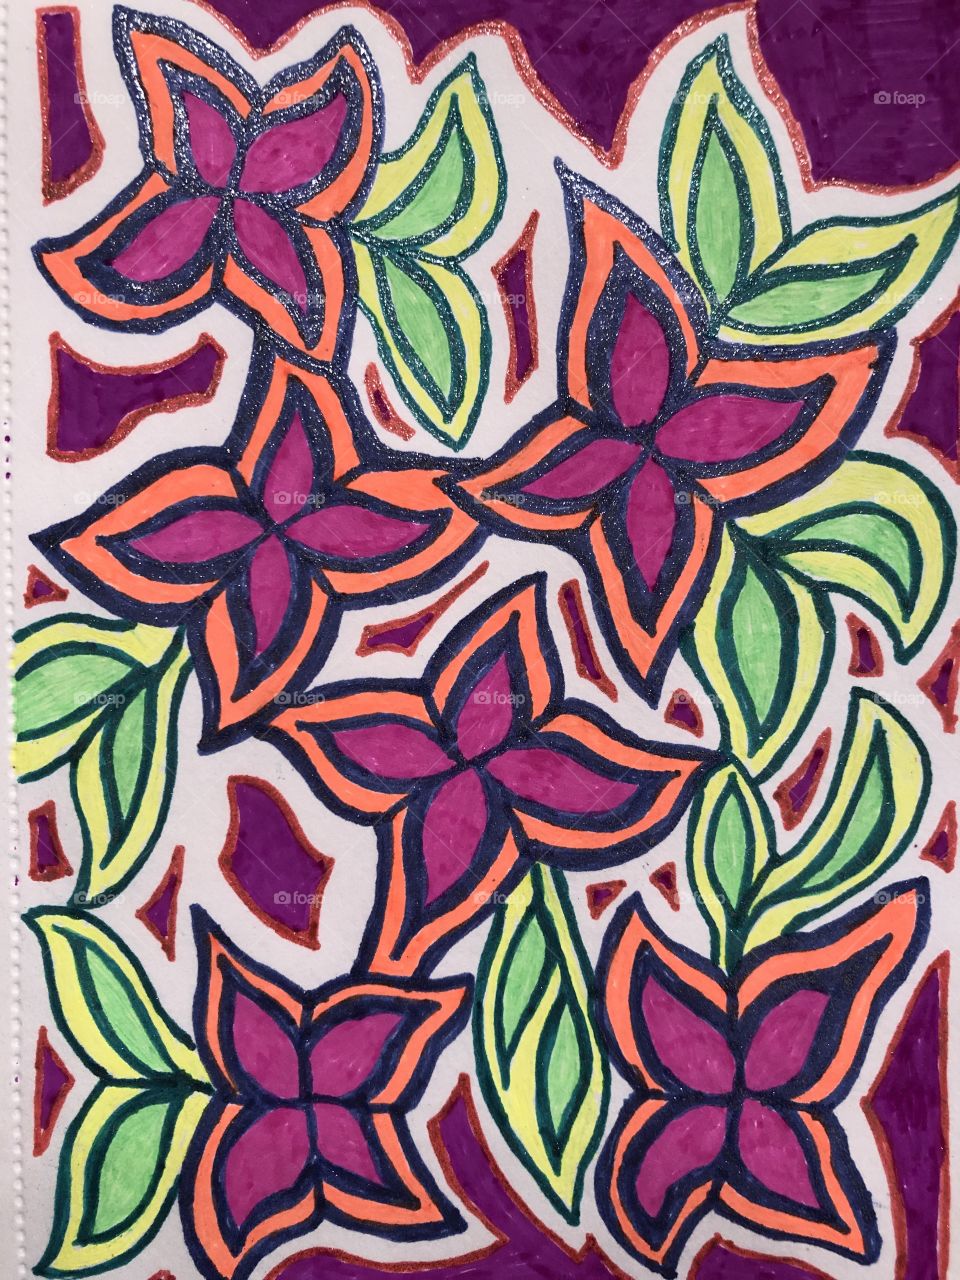 Flowers and leaves created by gel pens on paper